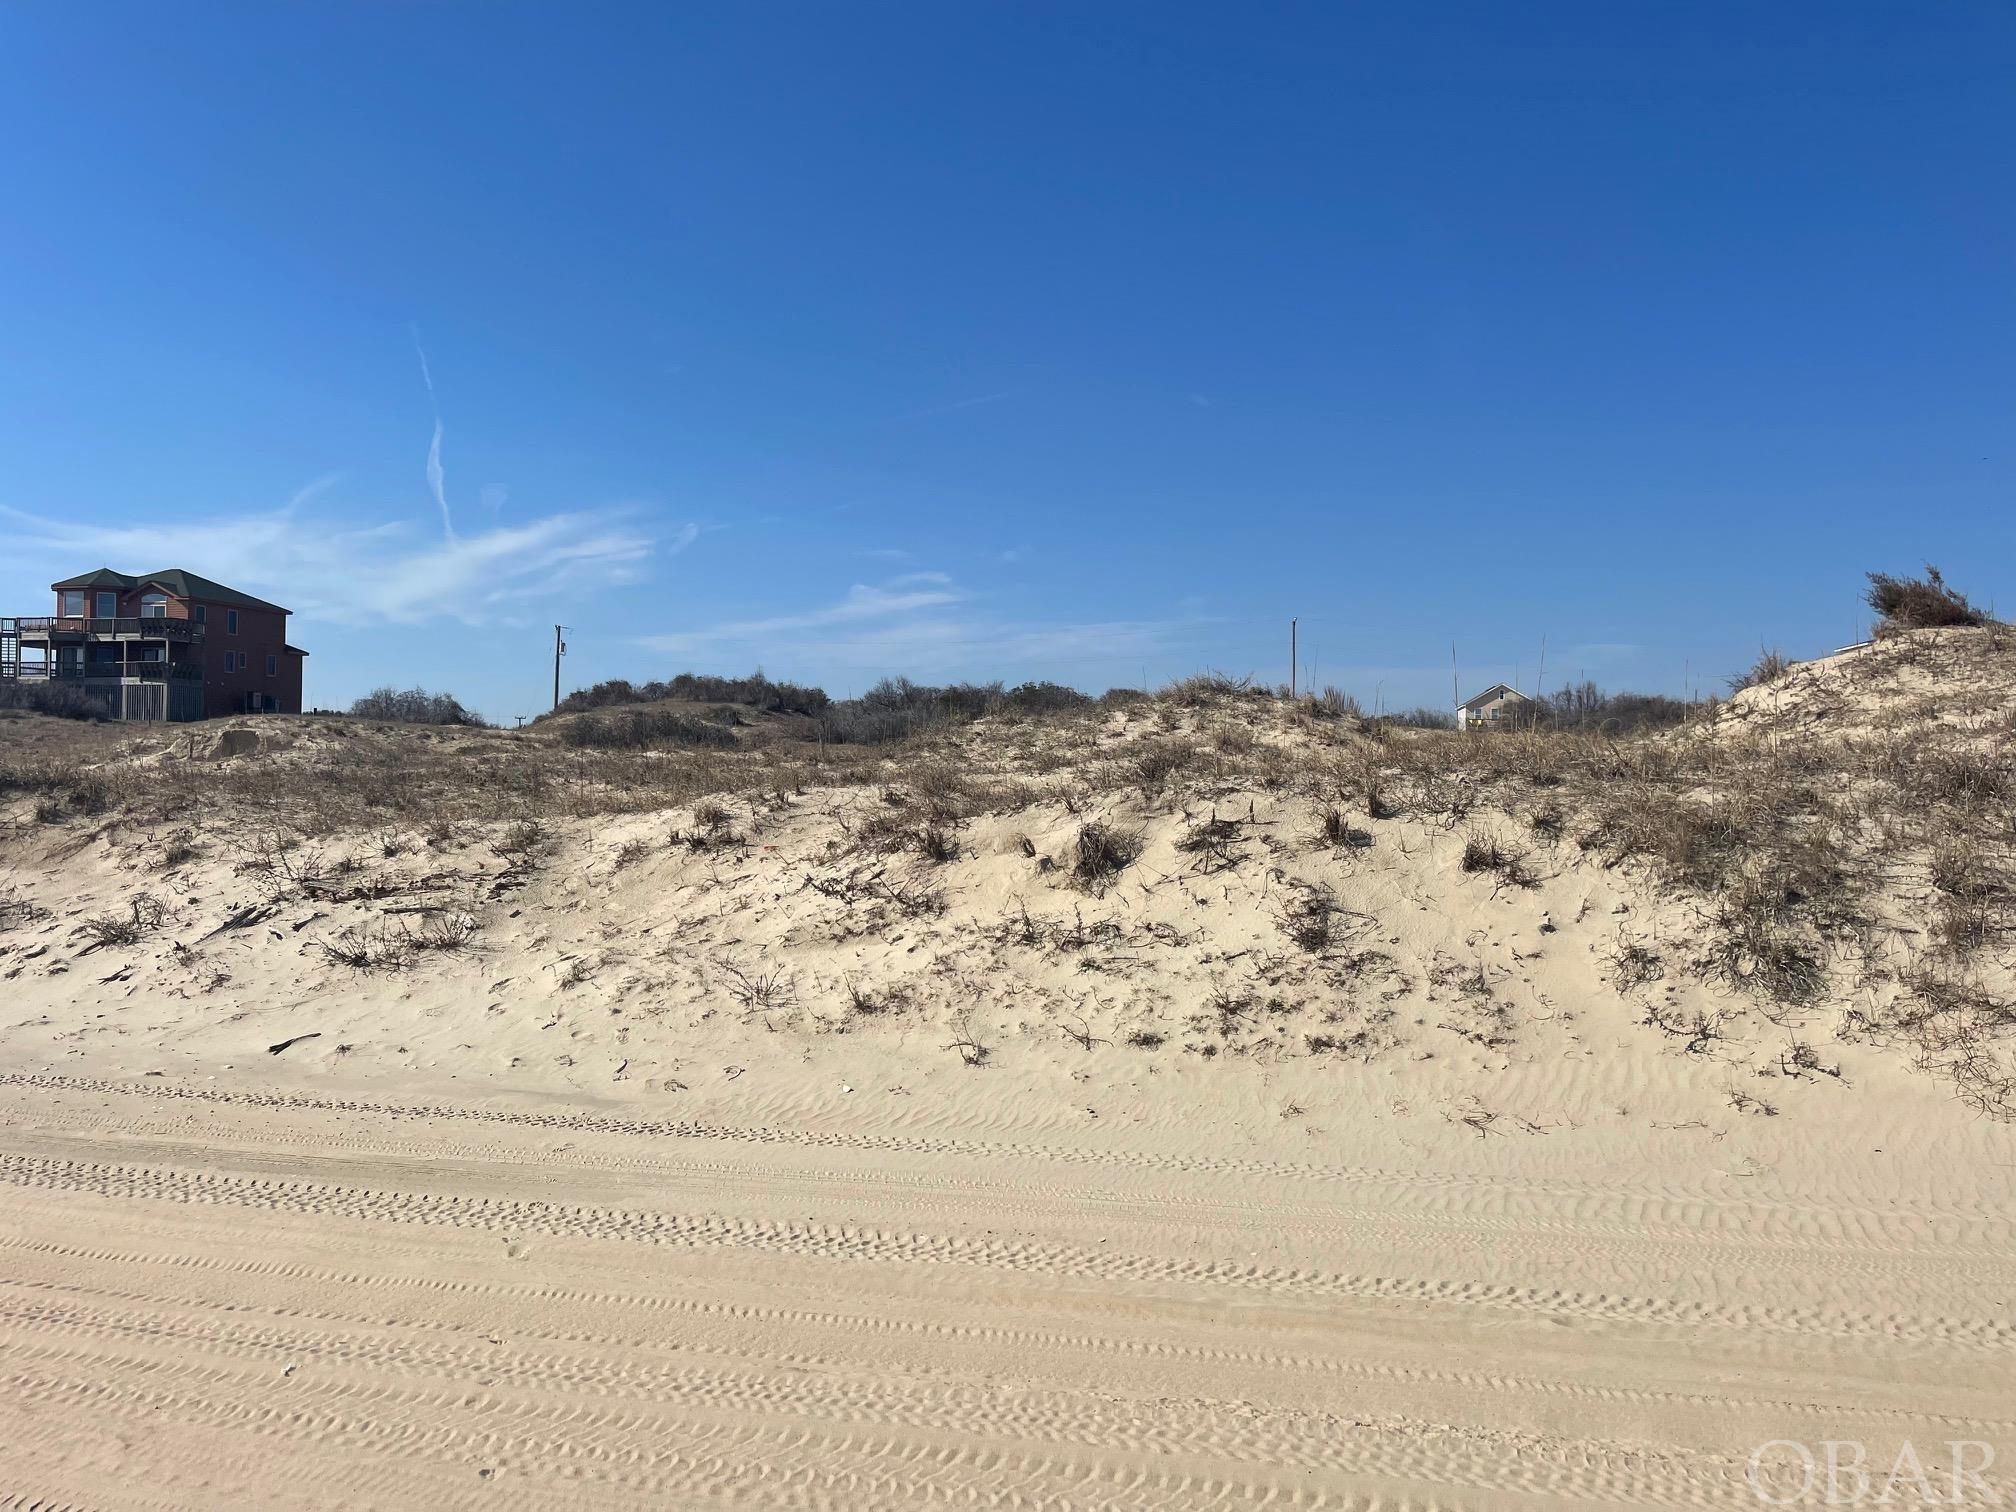 Remarkable semi-OF lot in desirable North Swan Beach!.  Located in the x flood zone, this lot has ocean views just standing on the lot.  Would make a great location for a second home or vacation rental property.  Platted easement to the beach adjacent to the north side of the lot!  This is a must see and wont last long.